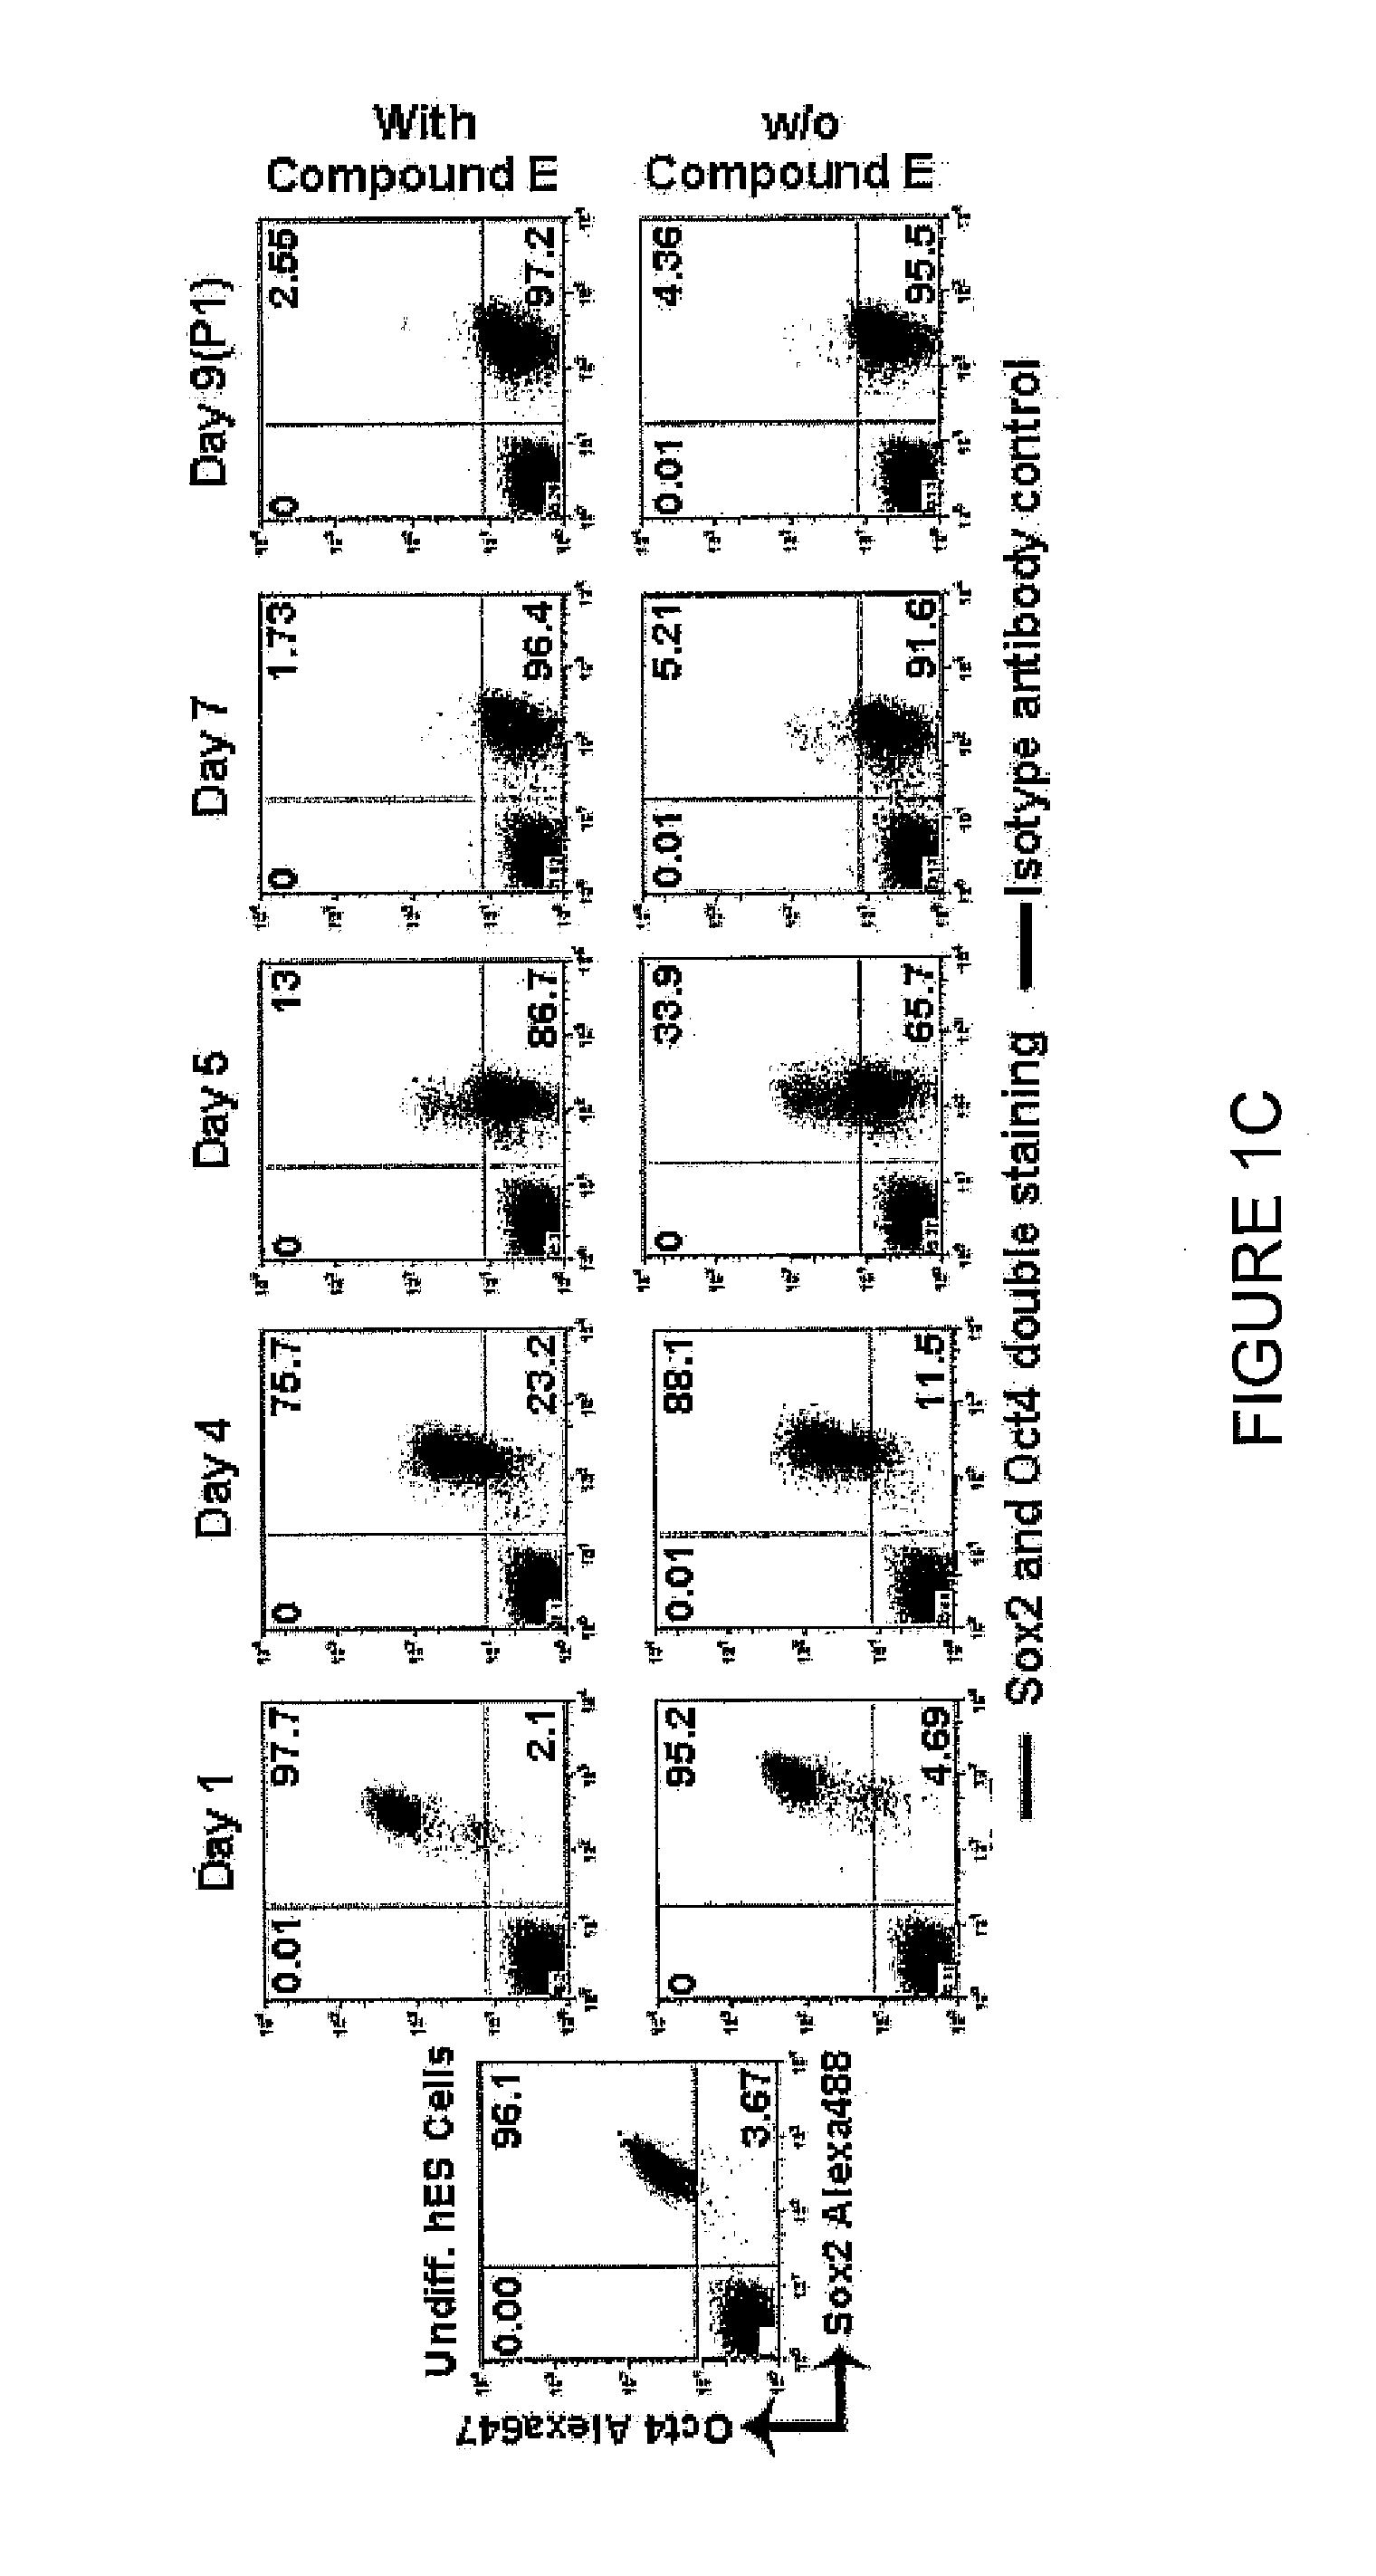 Expandable cell source of neuronal stem cell populations and methods for obtaining and usnig them